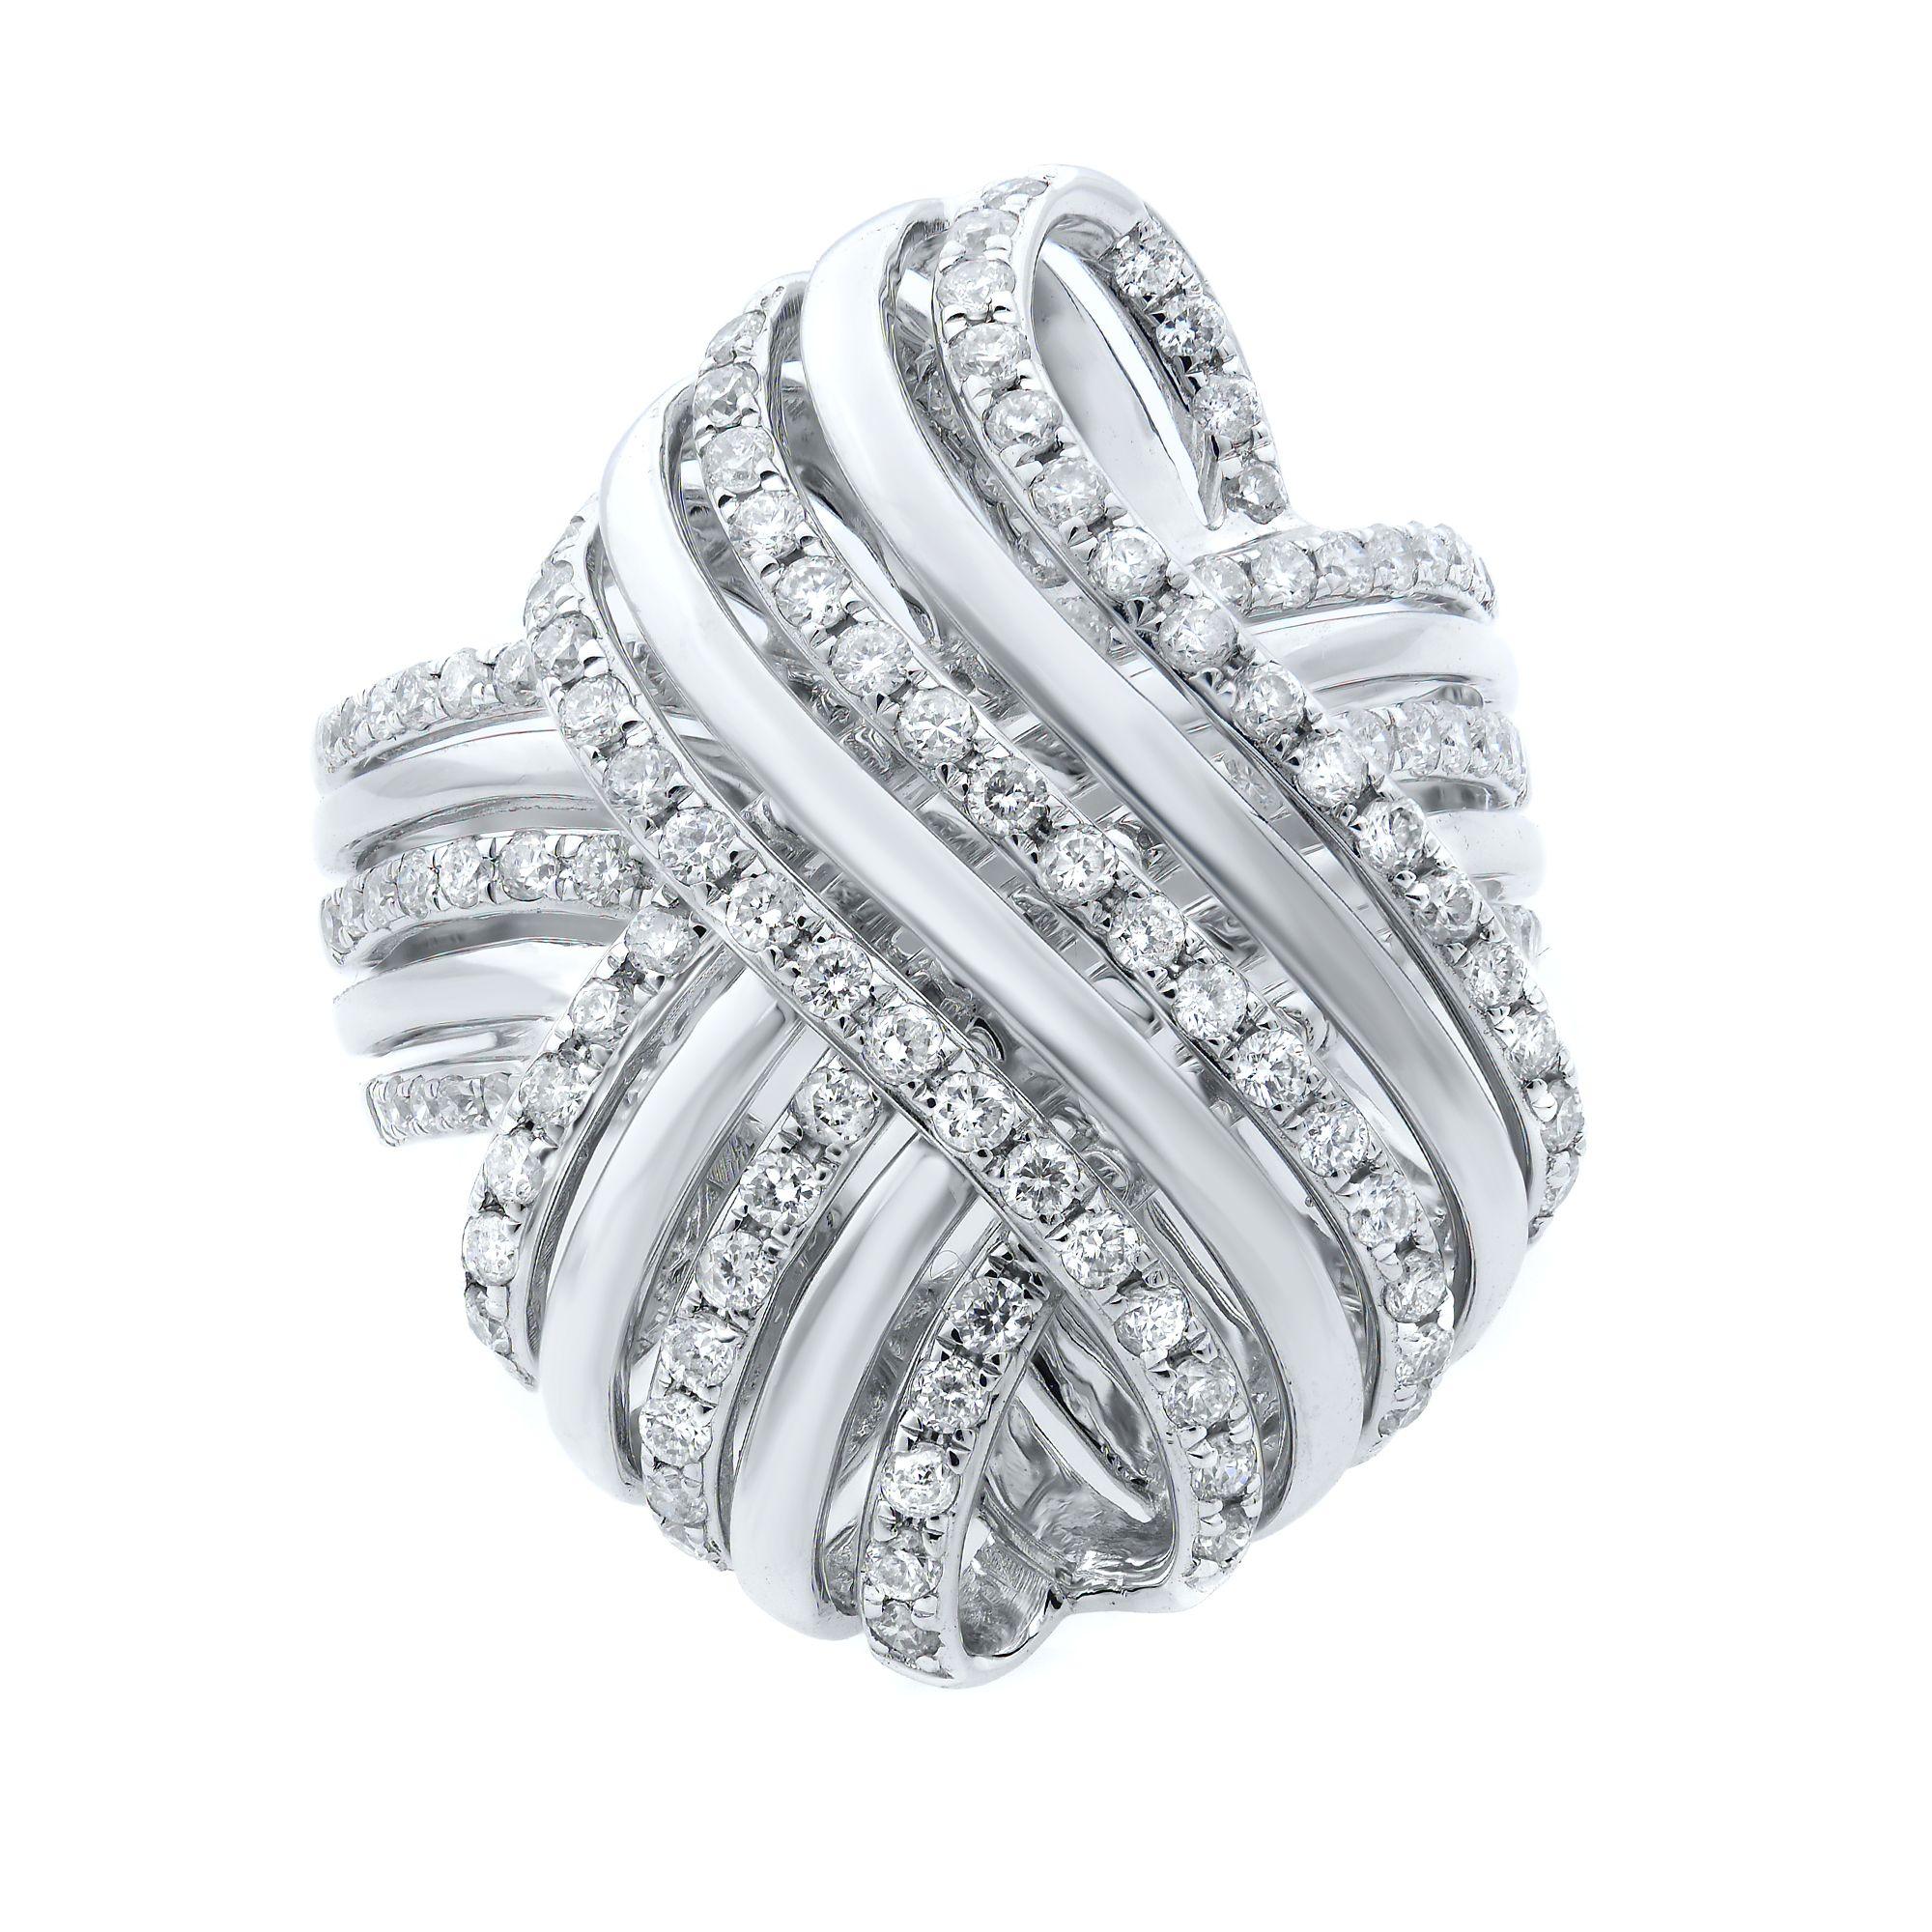 This beautiful cocktail ring features sparkling round cut diamonds encrusted in a knotted design. Crafted in high polished 14k white gold mounting. Total diamond weight is approximately 0.87ct with estimated clarity VS2 and G color. Ring size 7.